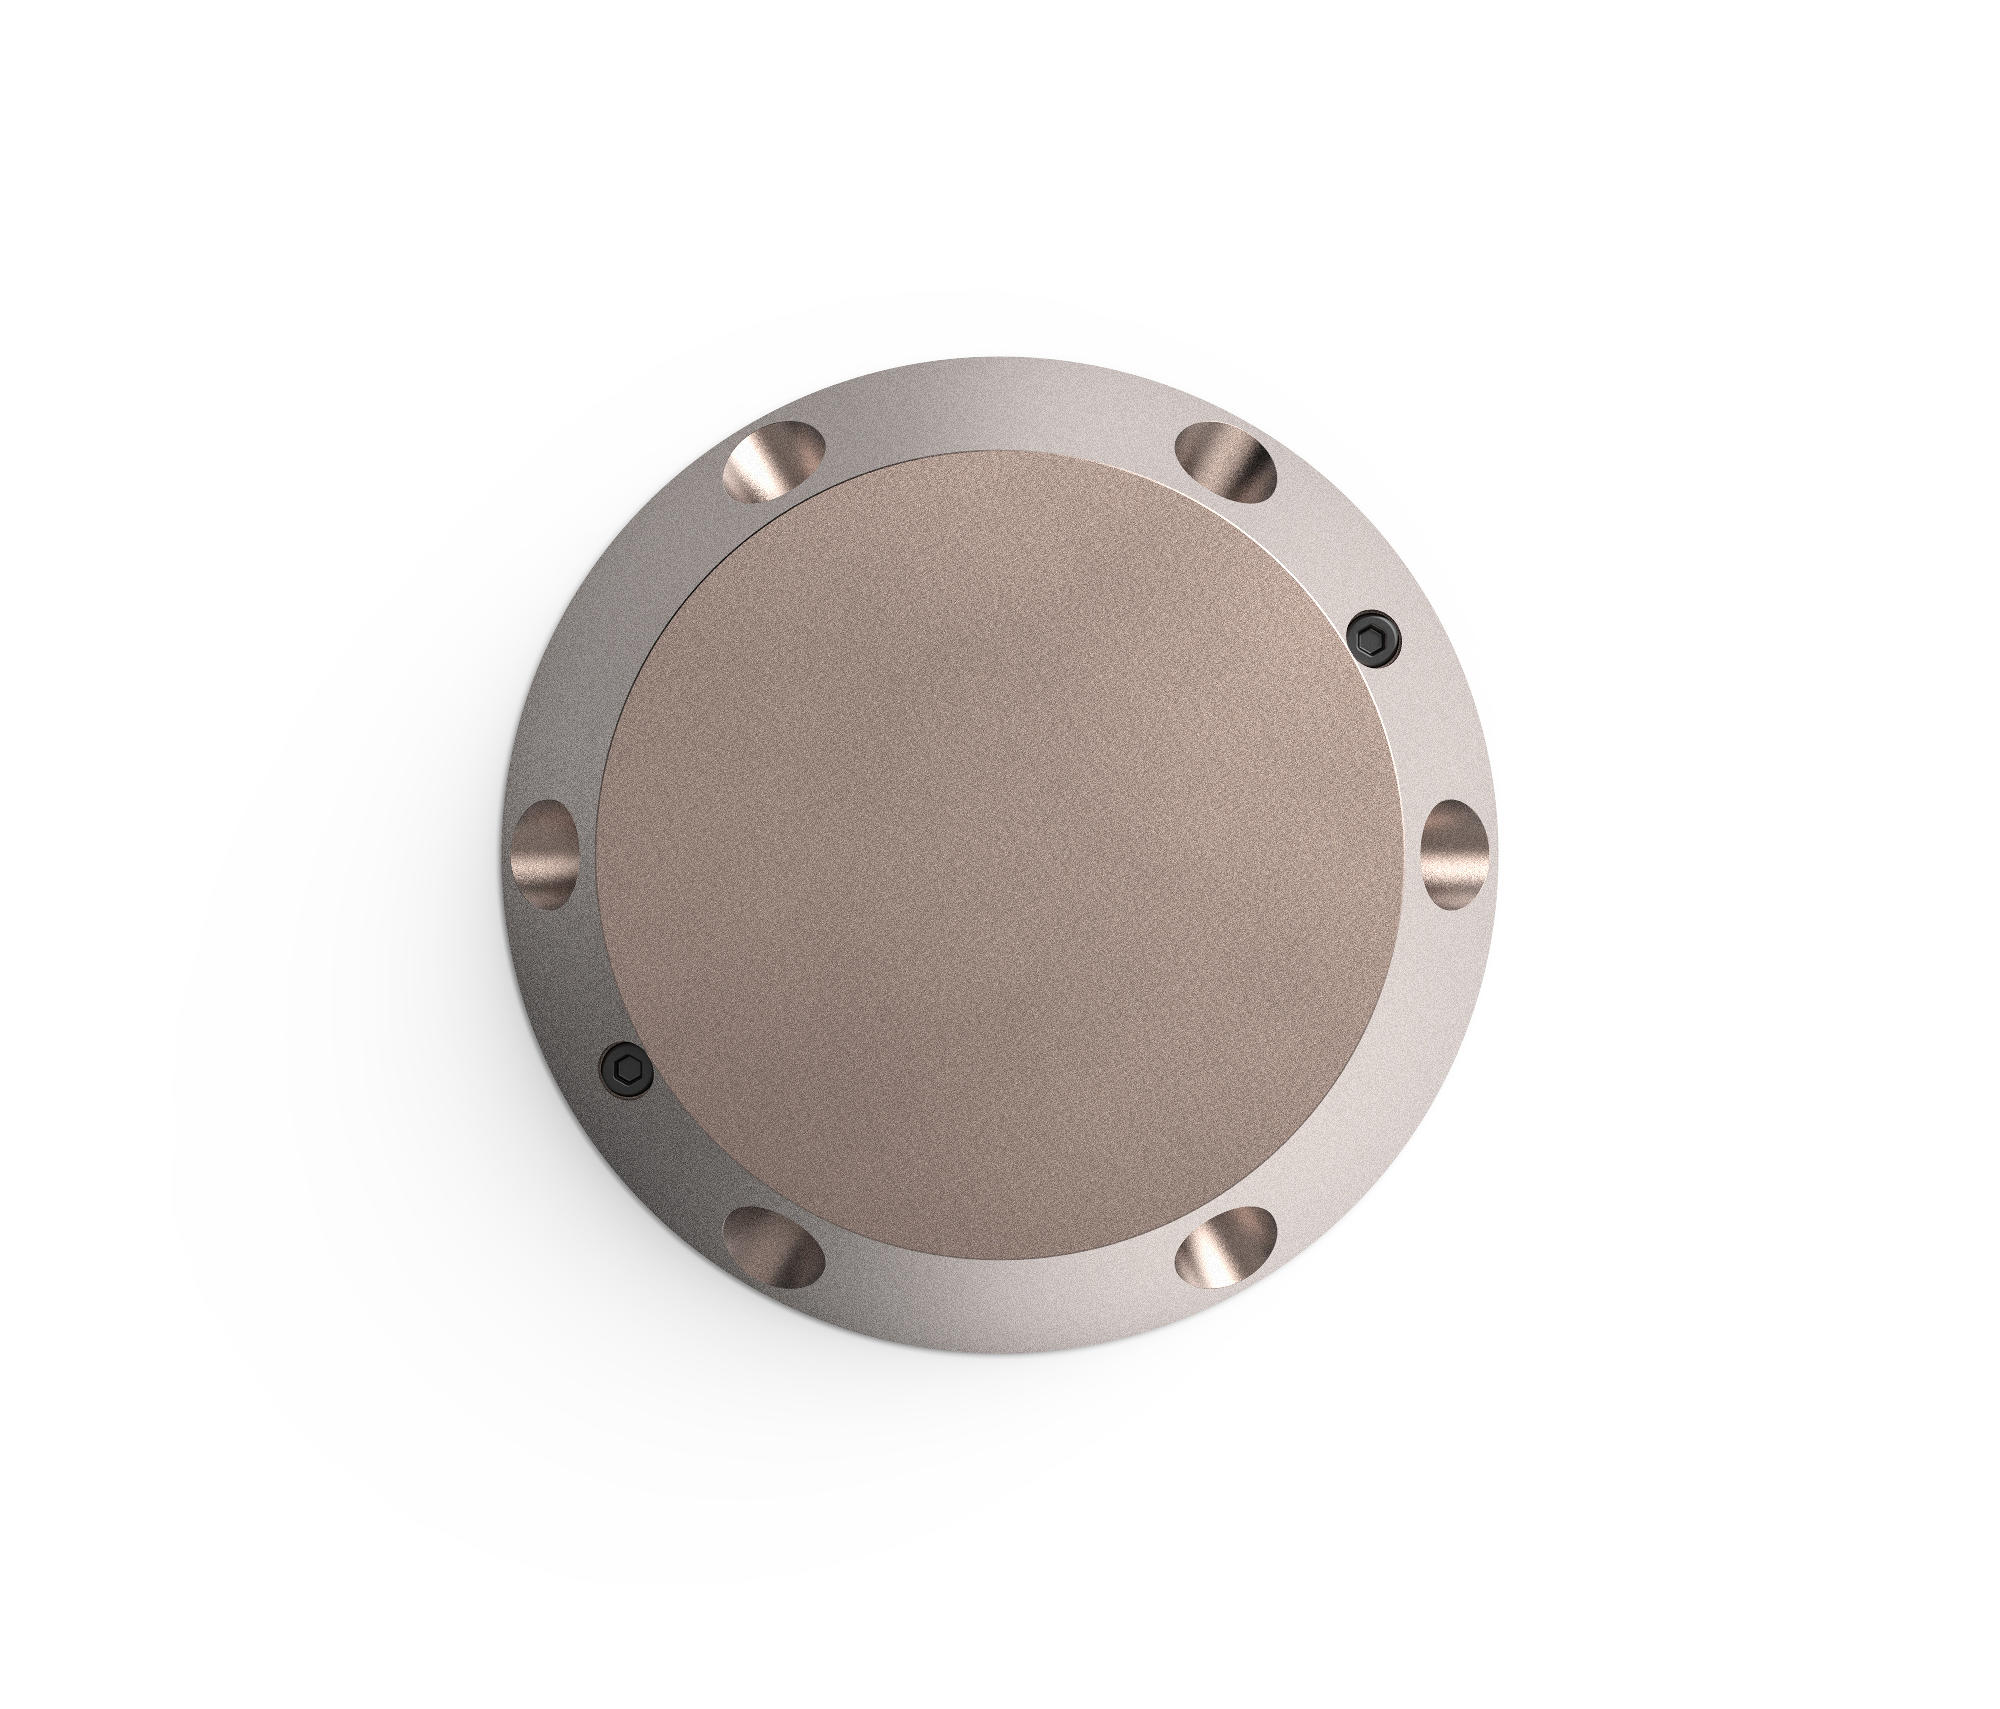 STARLIGHT N100 - Outdoor recessed wall lights from Stral